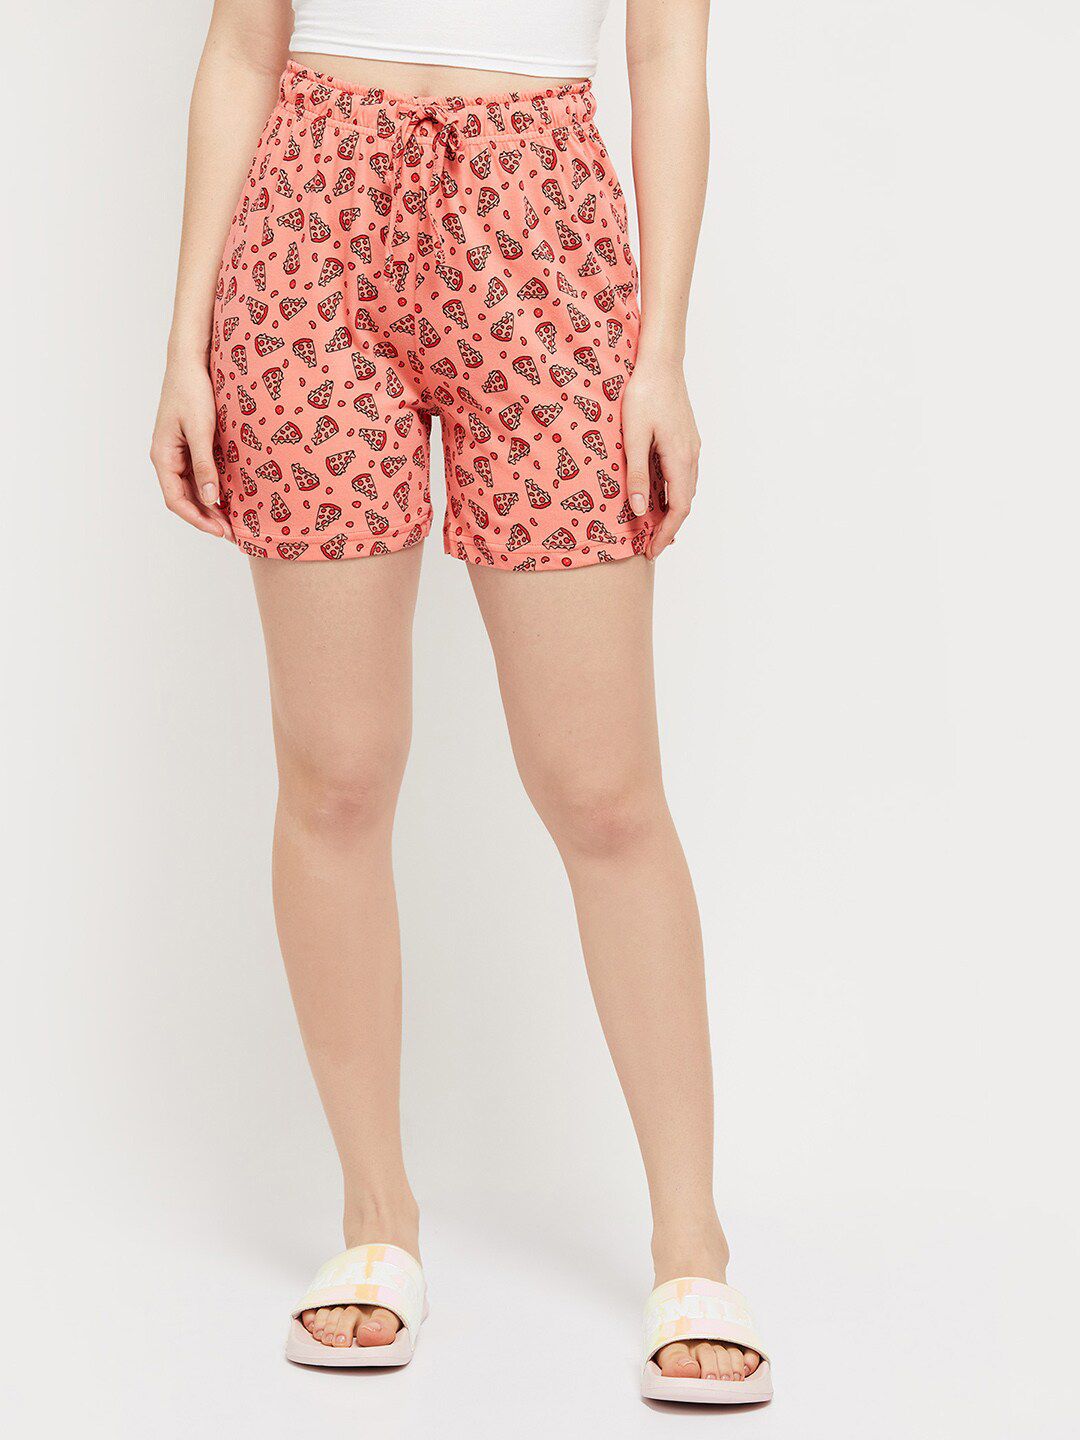 max Women Peach-Coloured & Black Printed Lounge Shorts Price in India